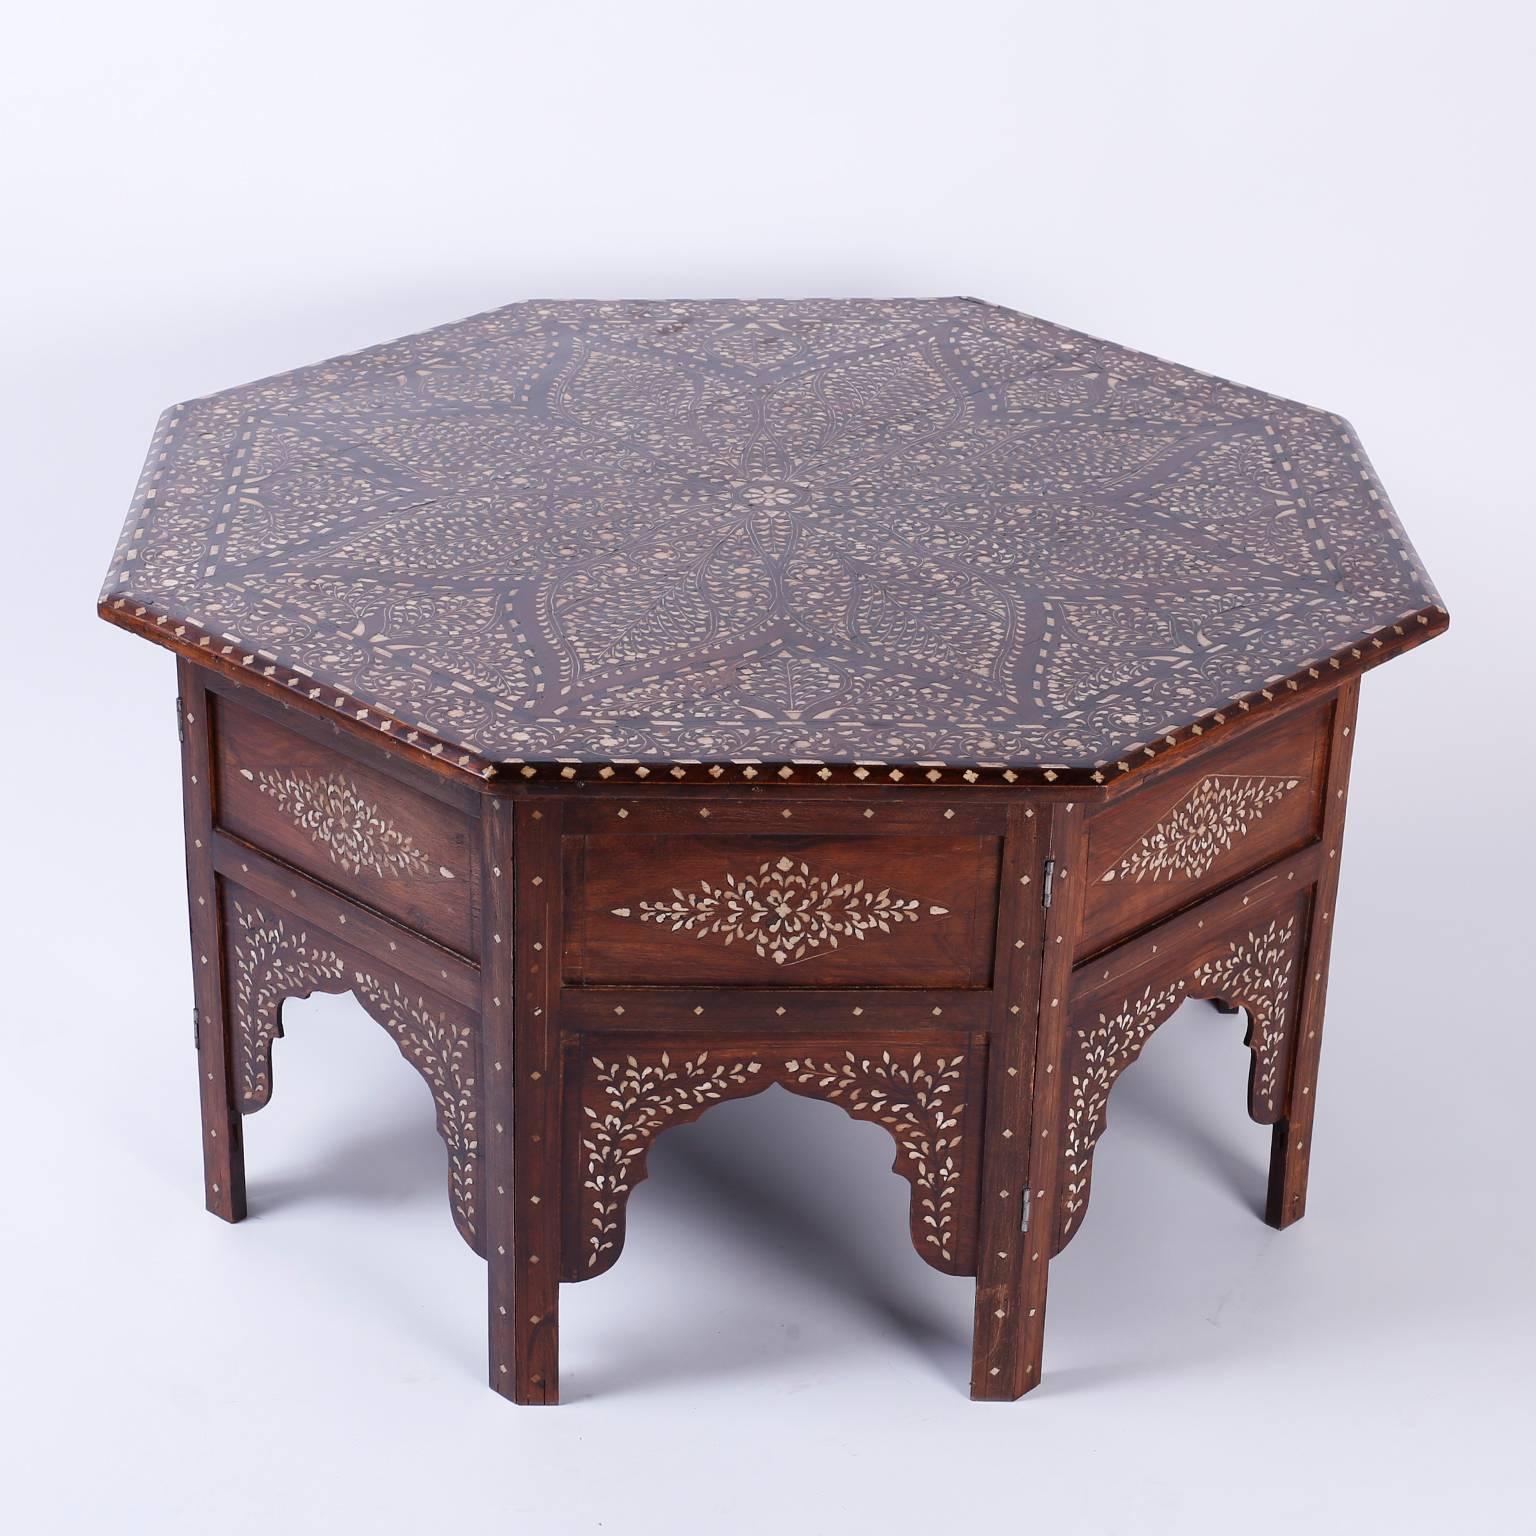 Anglo-Indian Syrian Inlaid Octagon Coffee Table